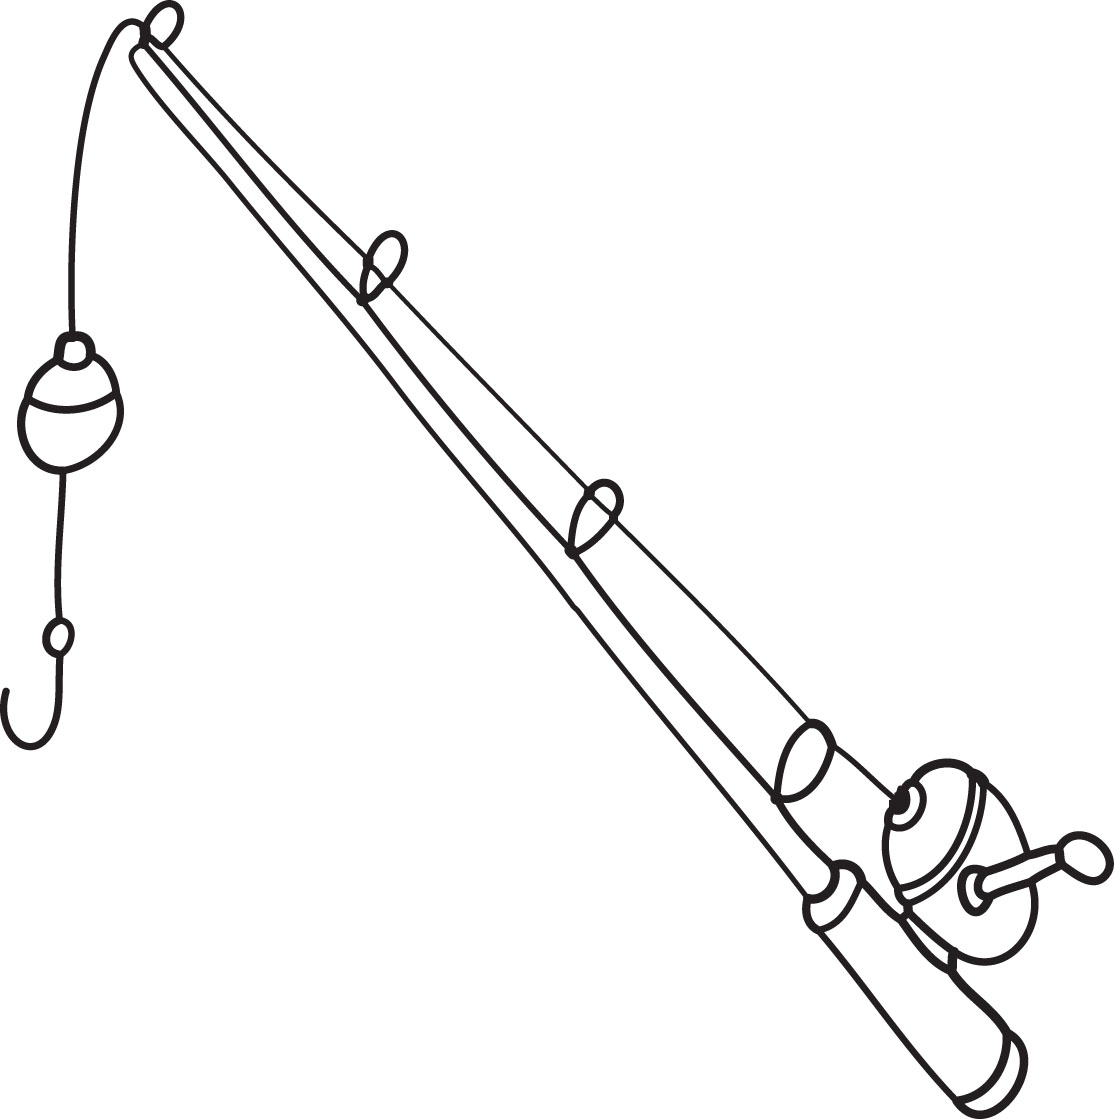 Fishing pole and reel with fi